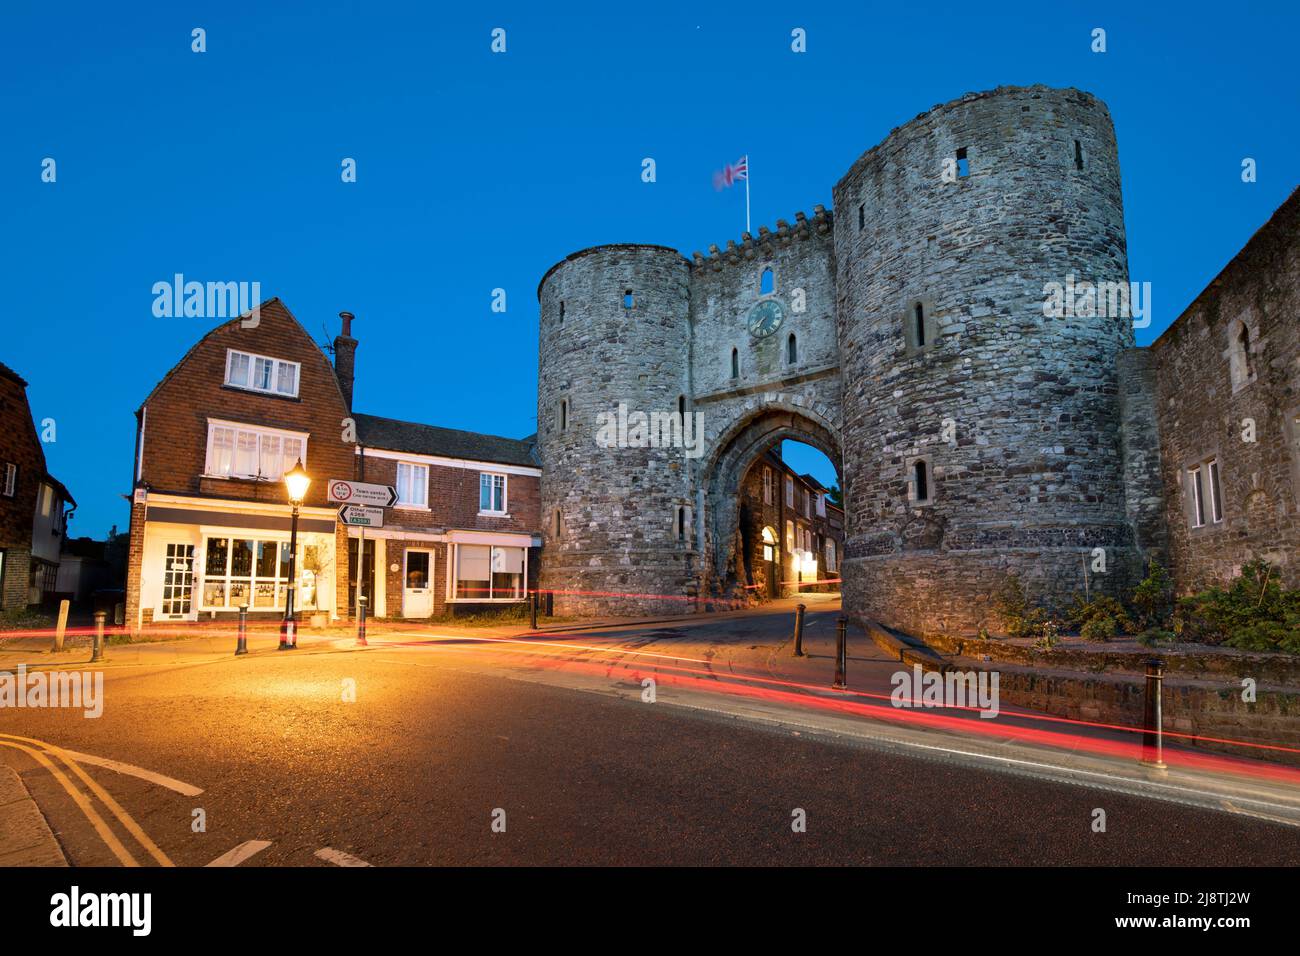 The medieval Landgate lit up at night, Rye, East Sussex, England, United Kingdom, Europe Stock Photo